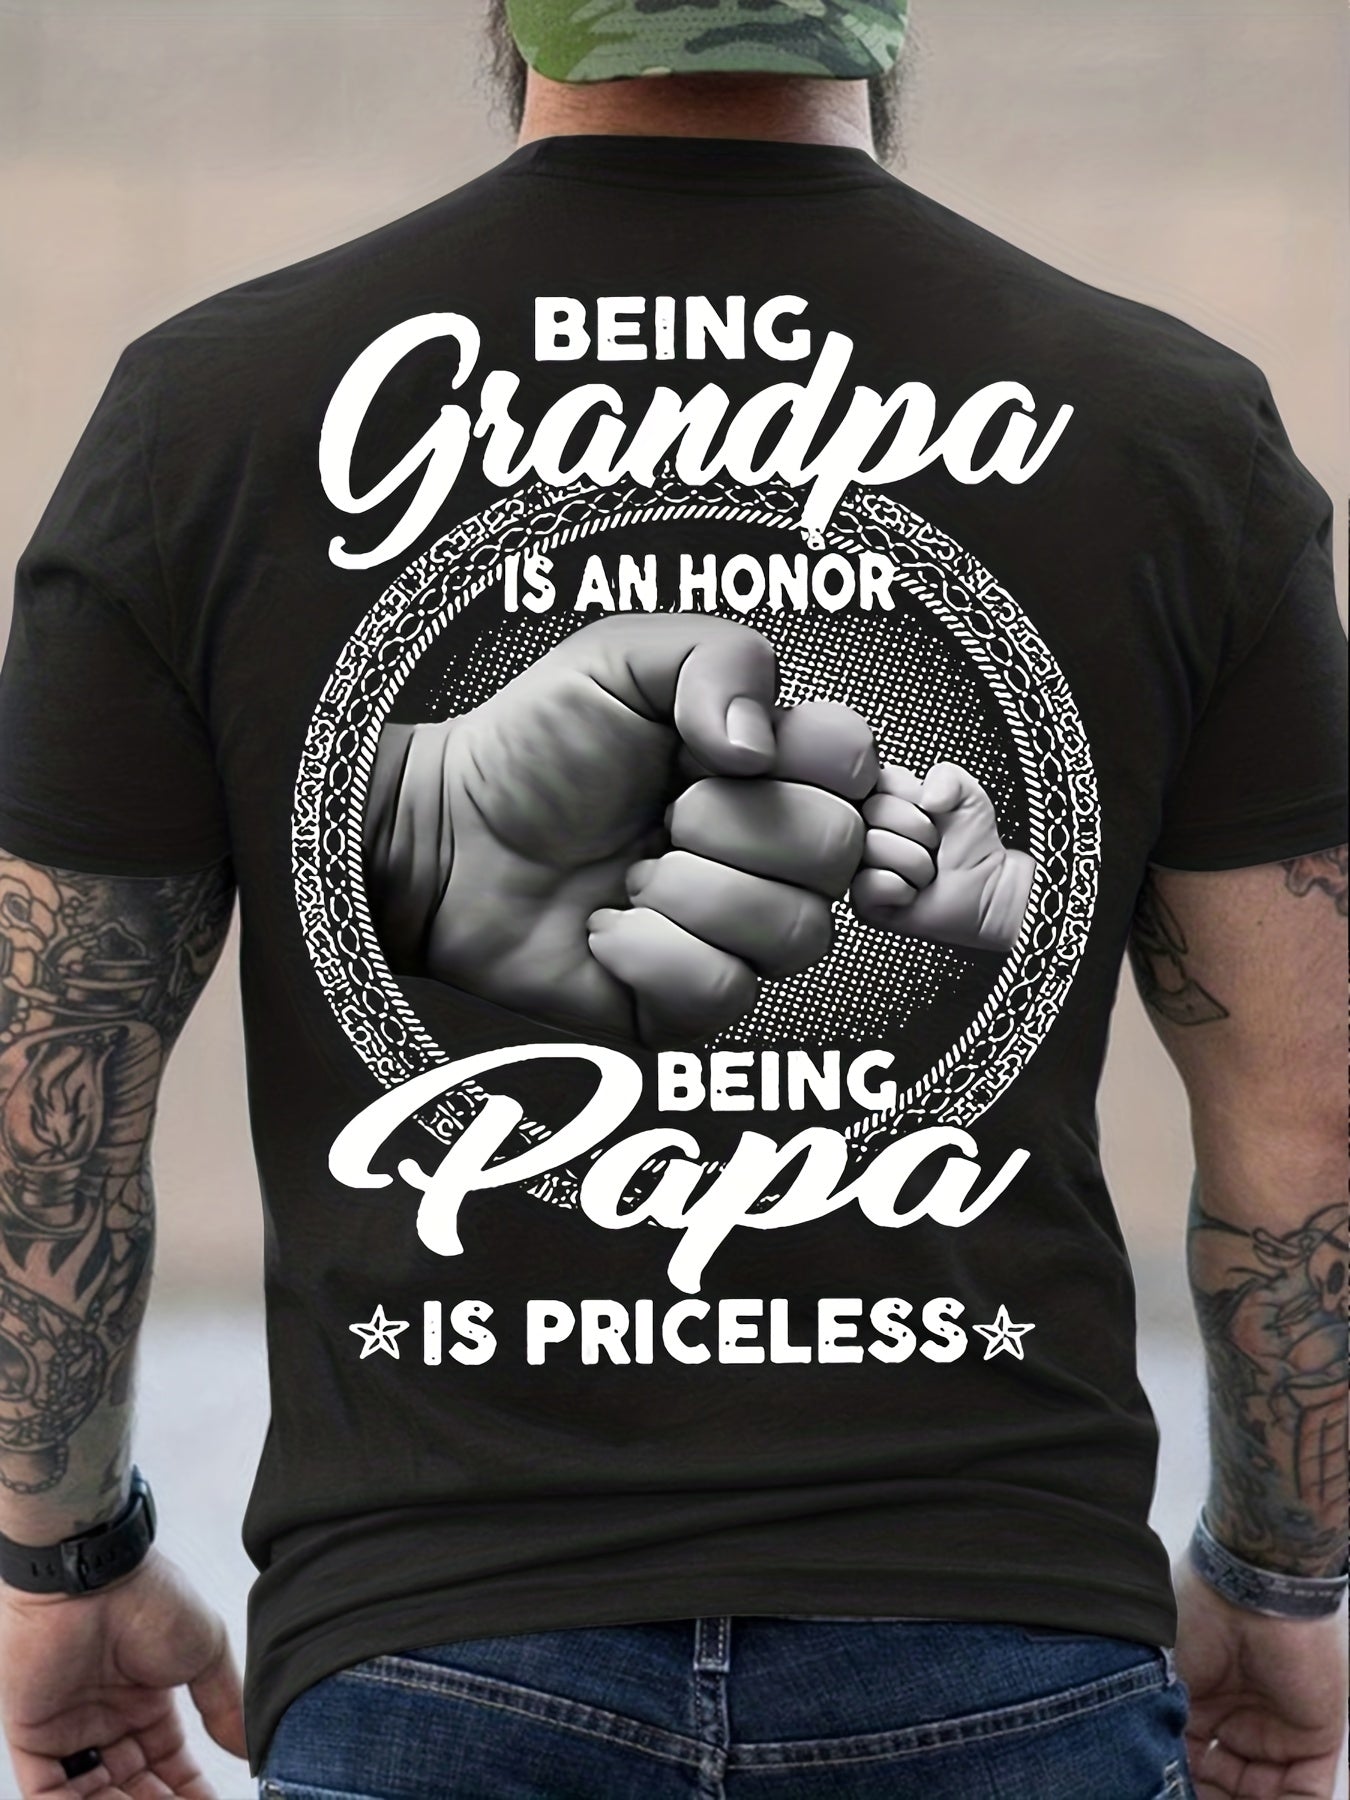 Men's Trendy T-shirt For Summer Outdoor, Casual "Being Grandpa Being Papa" Letter Print Slightly Stretch Crew Neck Tee Short Sleeve Stylish Clothing